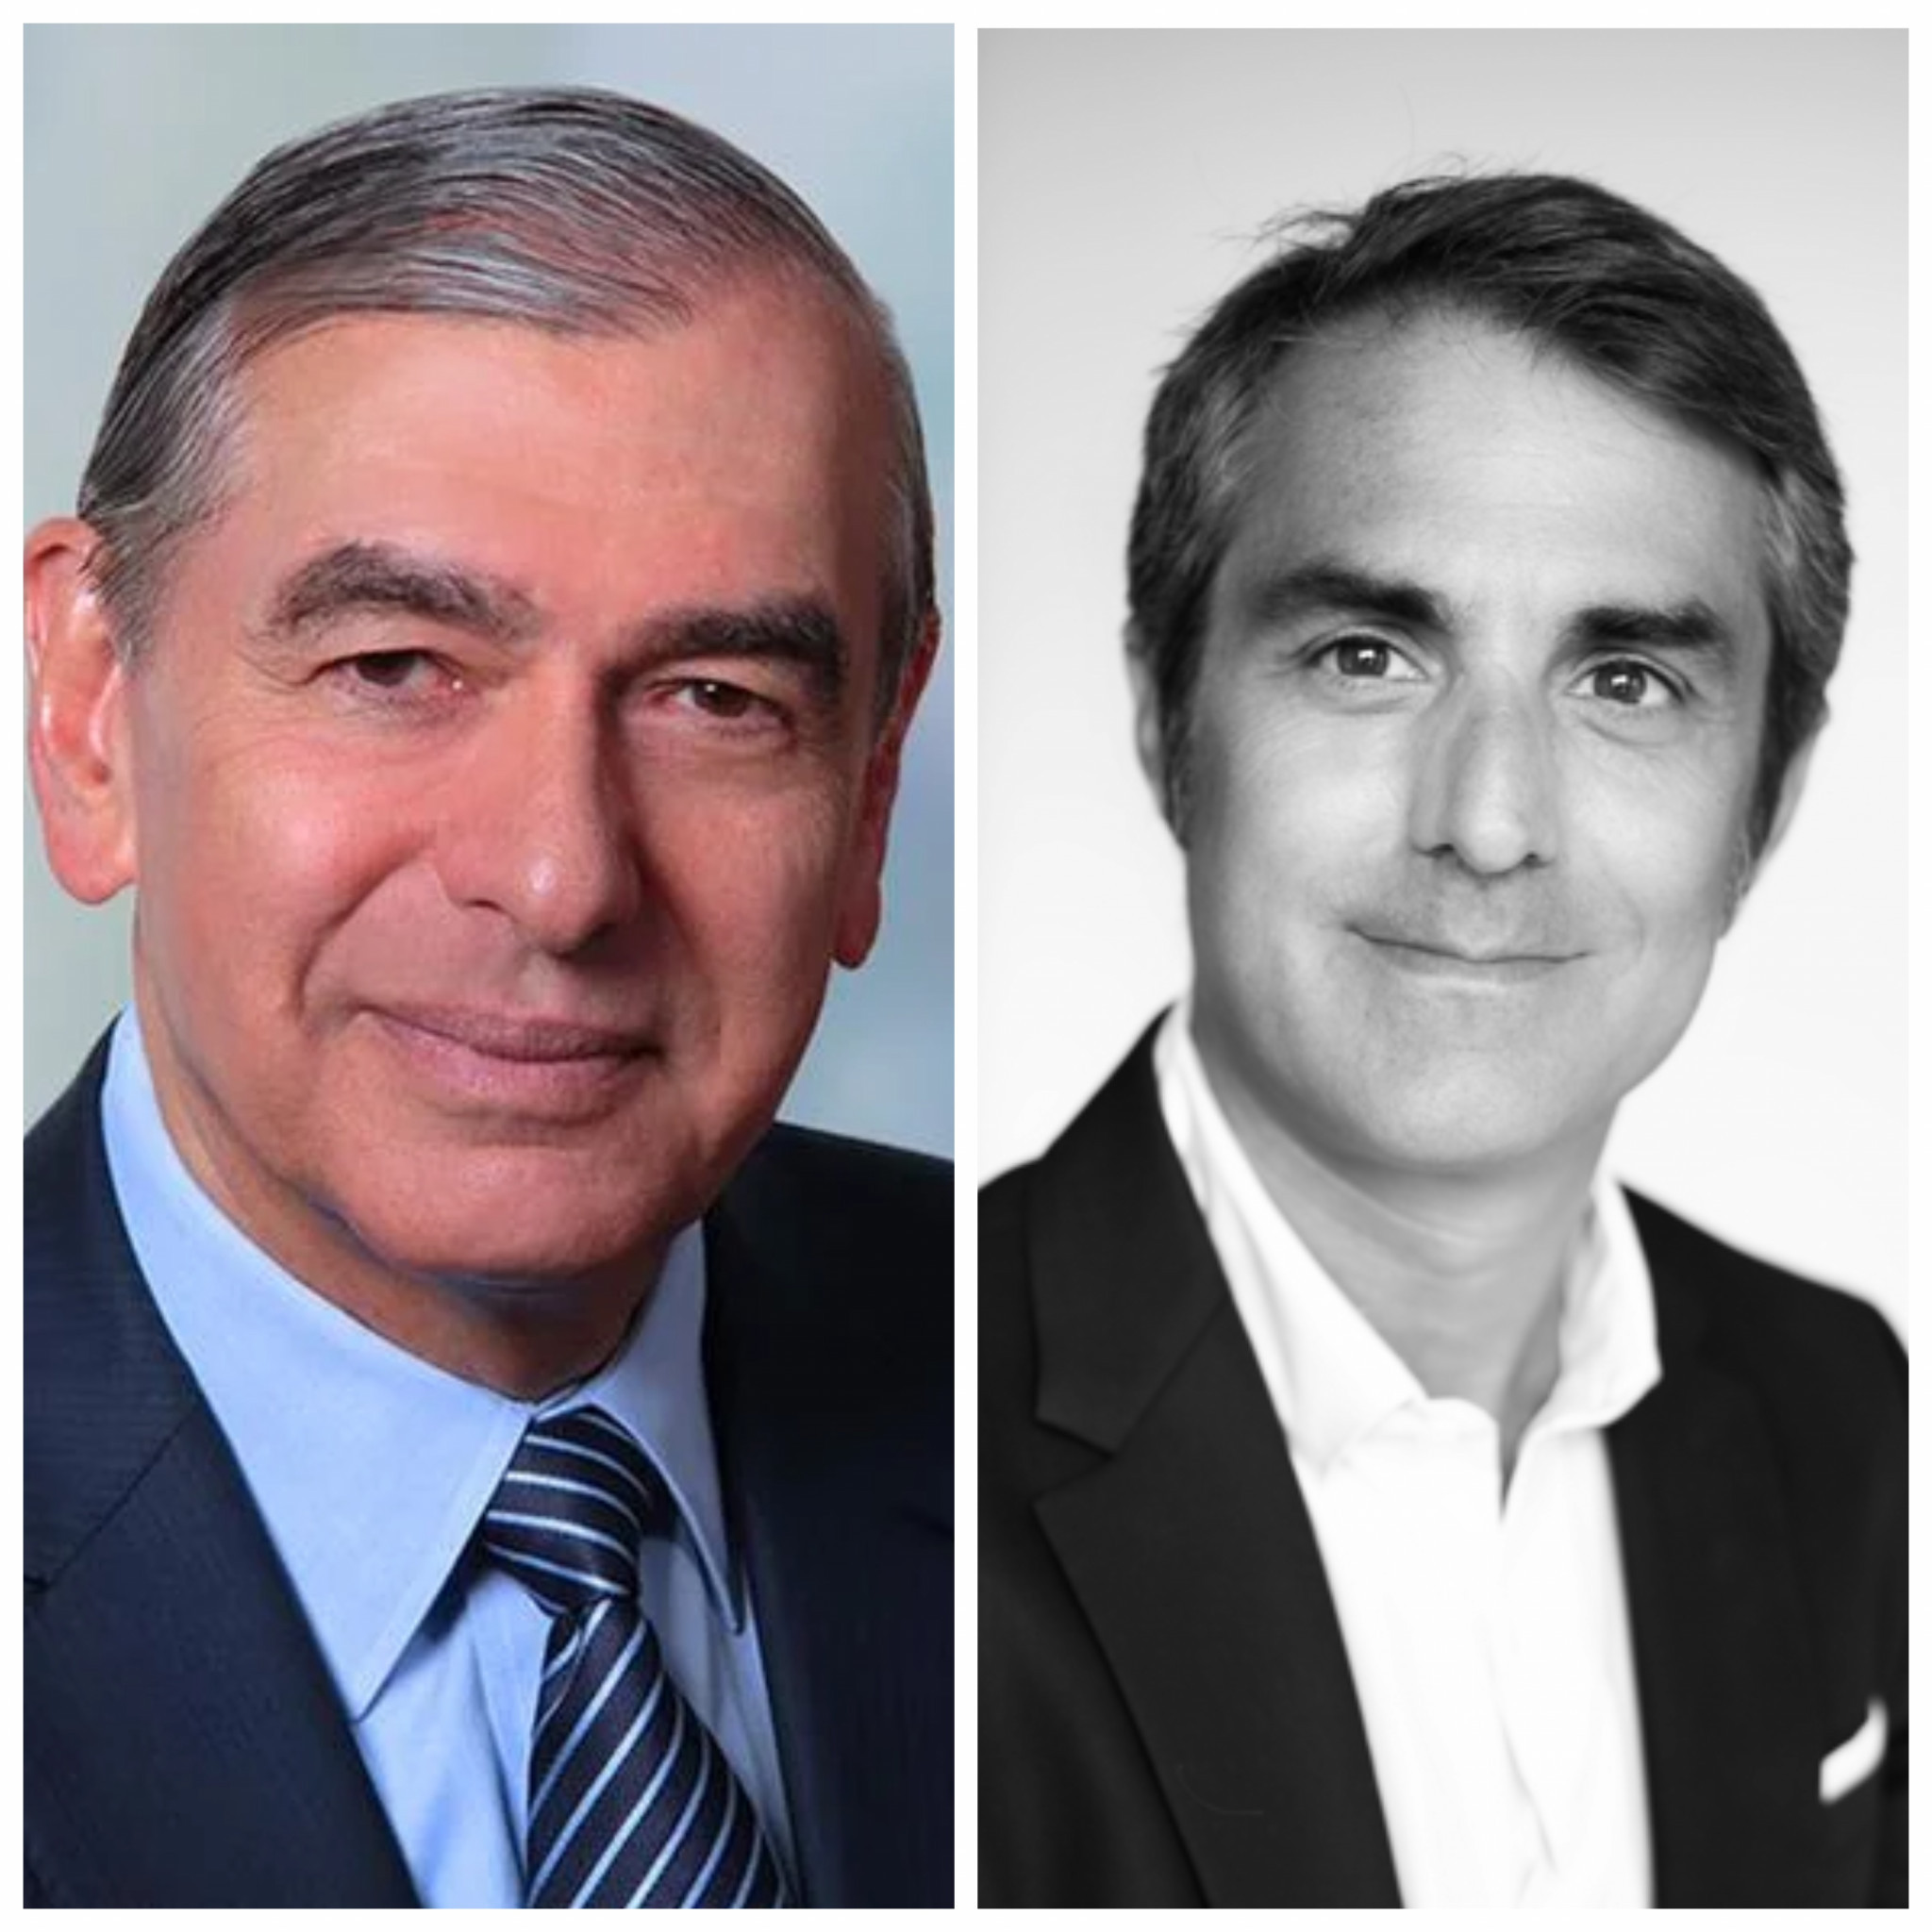 American lawyer Jeffrey Mishkin, left, and French lawyer Mathieu Maisonneuve, right, will join James Drake on the CAS Panel at the Kamila Valieva hearing ©Skadden, Arps, Slate, Meagher & Flom and Aix Marseille University 